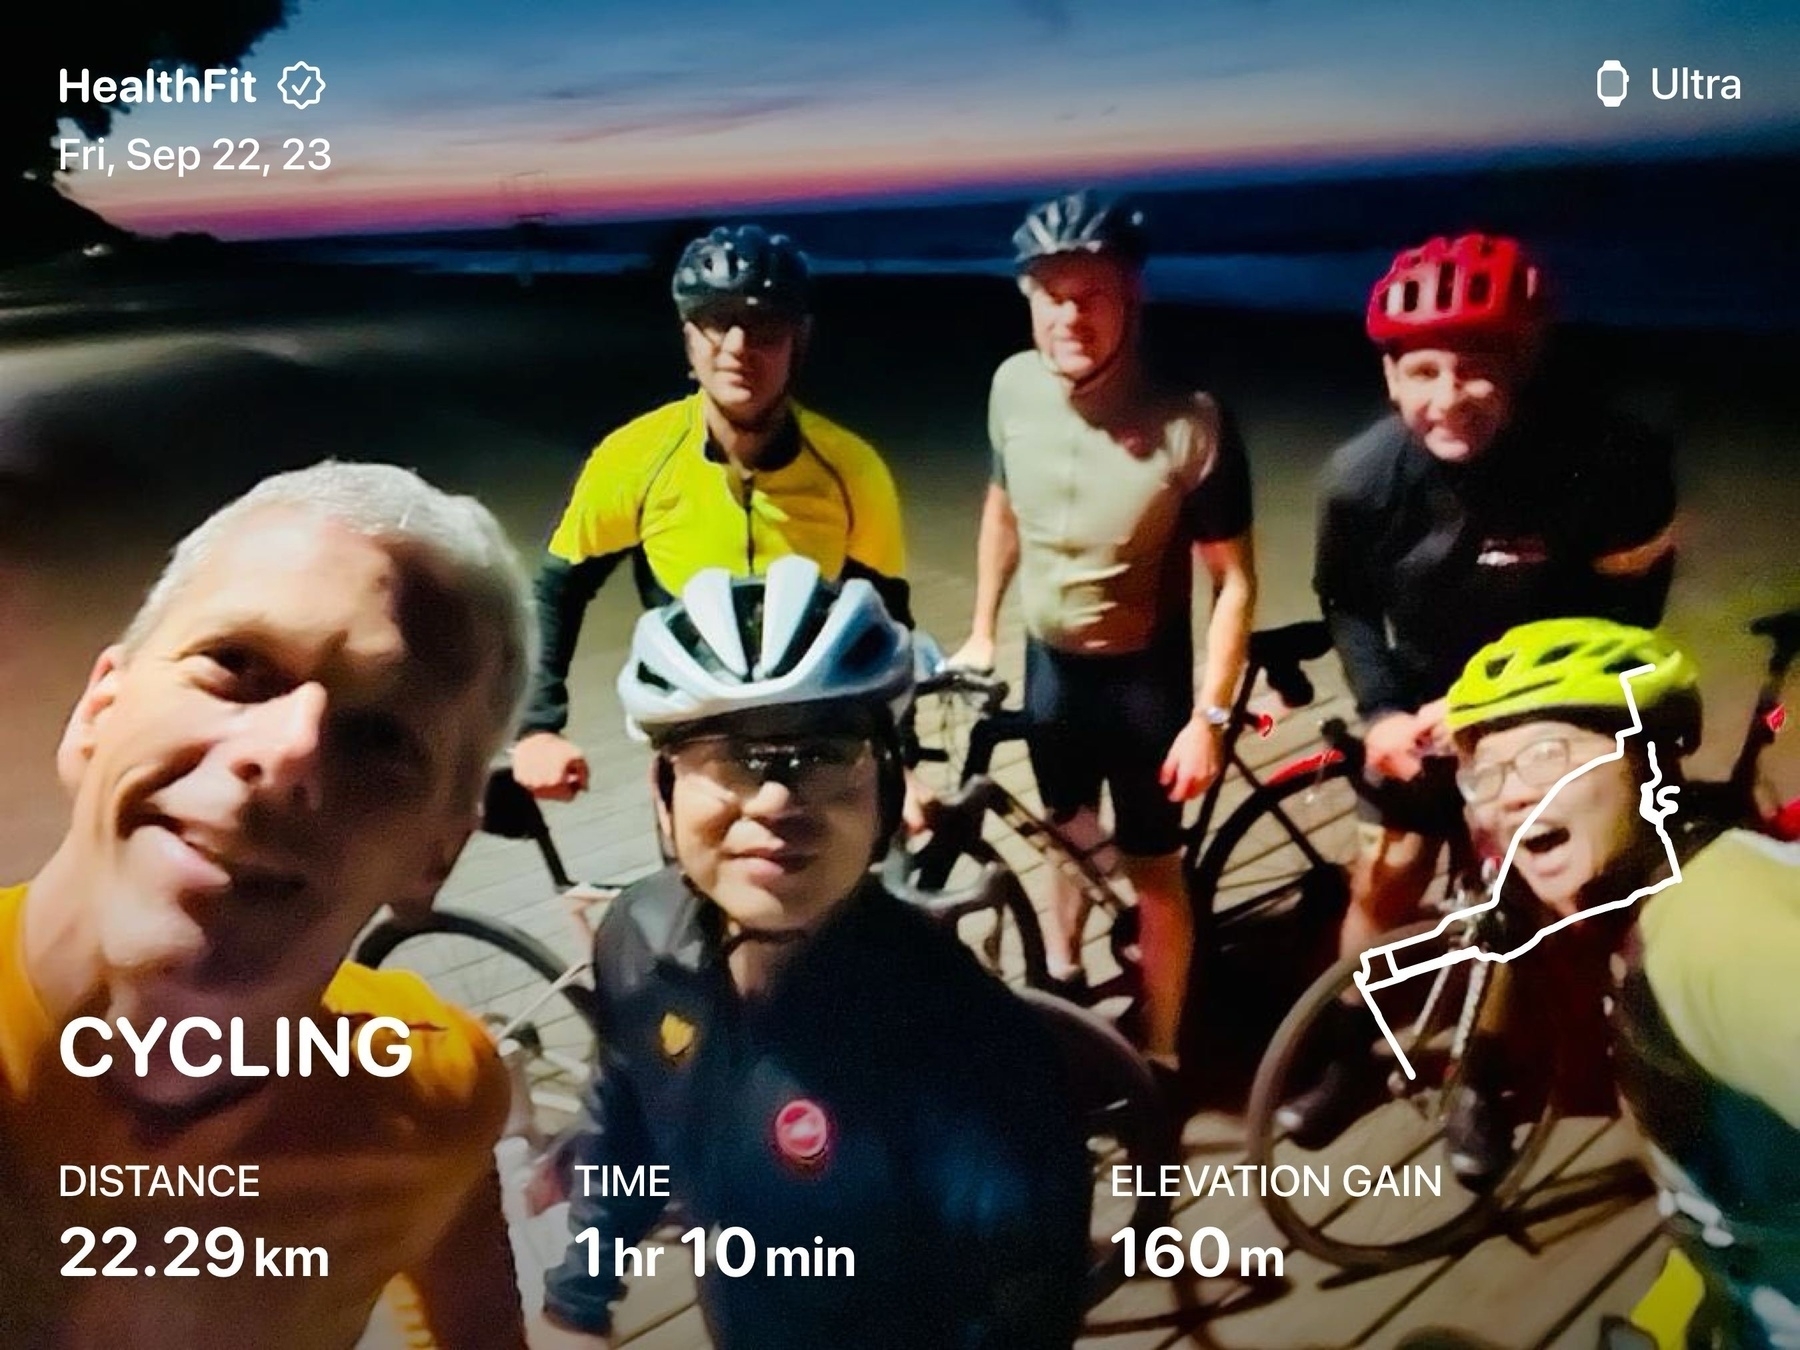 Crew of cyclist near a lake with the sunrise behind. Ride stats are overlaid: 22.39km 1hr10min